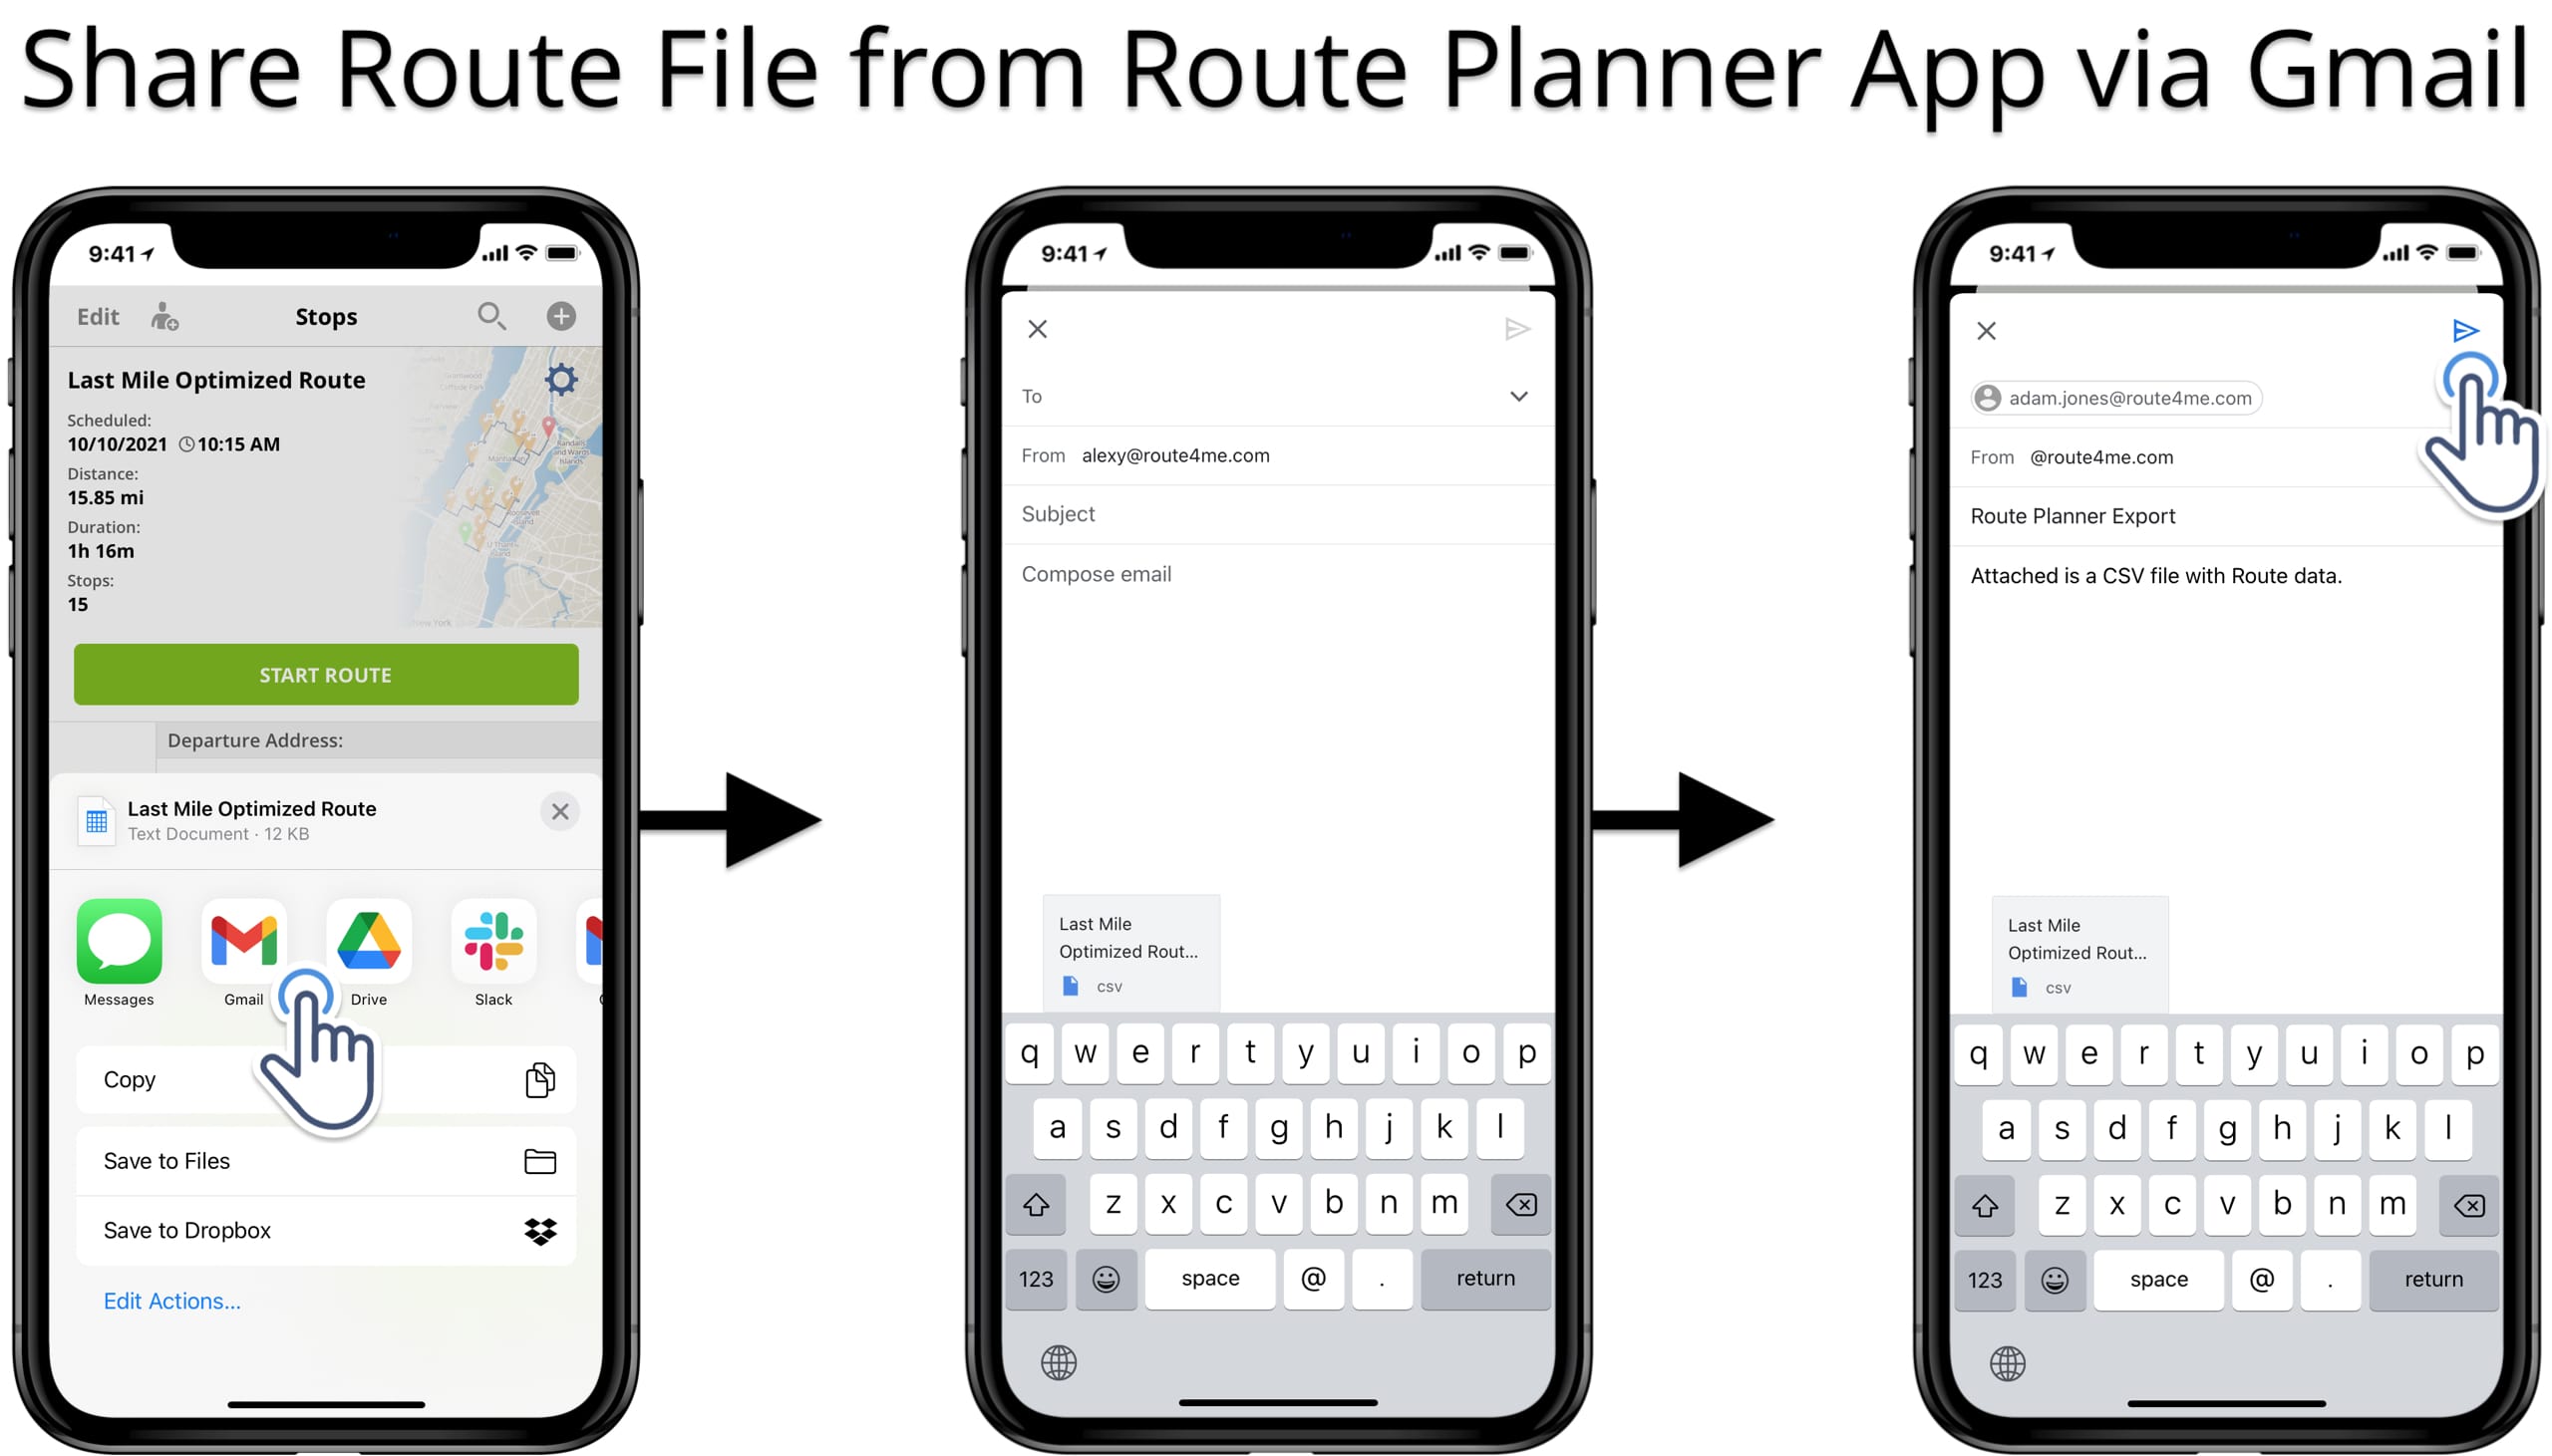 Send downloaded CSV route files from route planner app via Gmail.